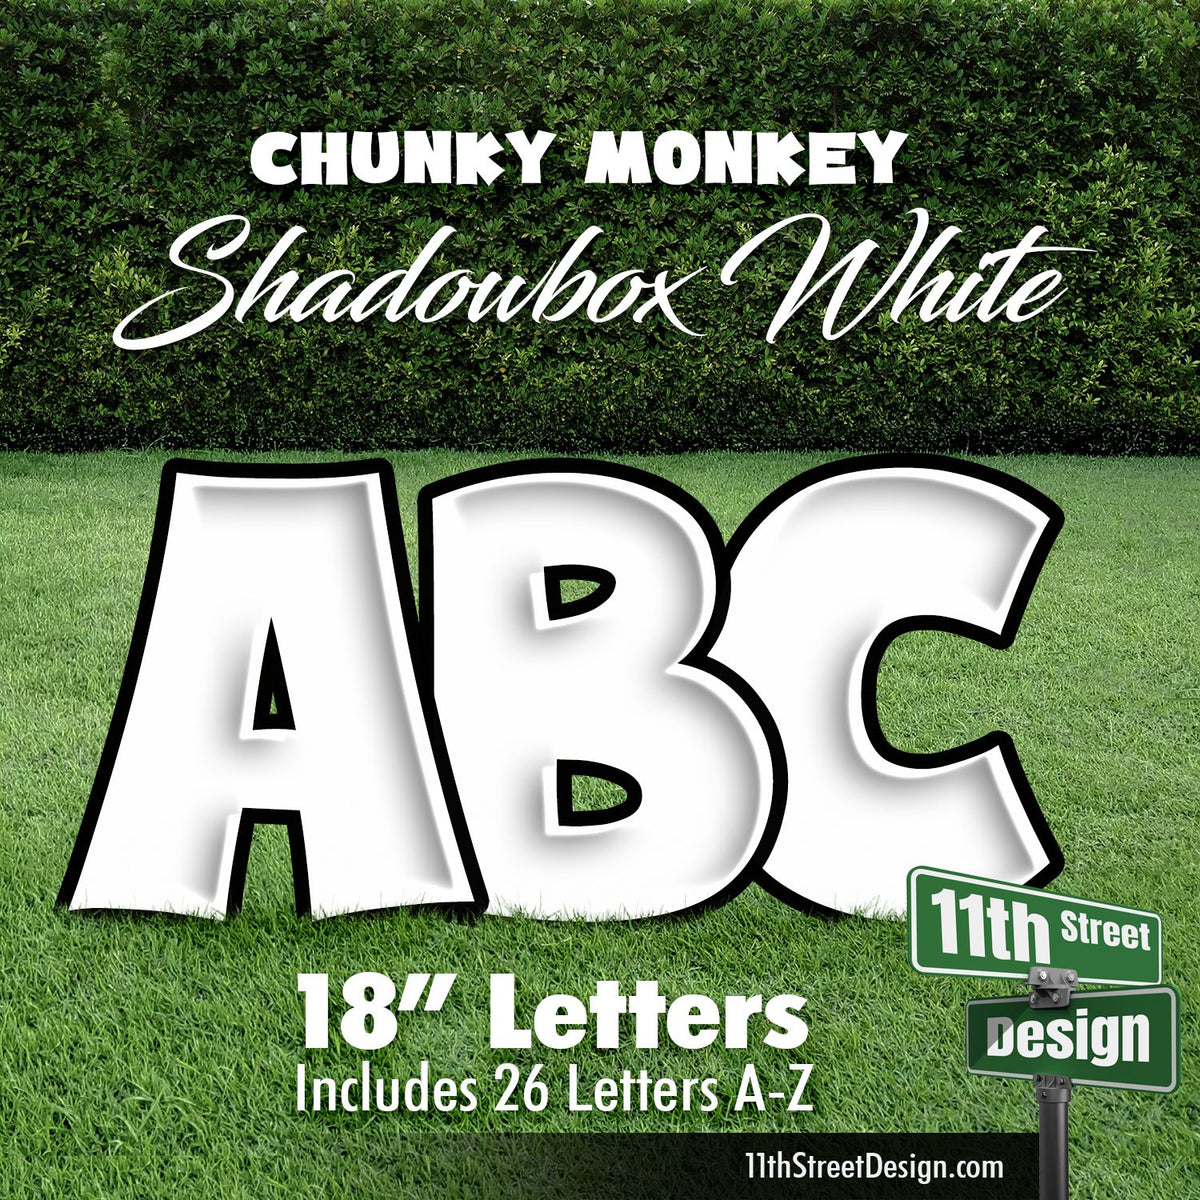 Shadowbox White 18&quot; Chunky Monkey 26 Letter Alphabet Yard Card Set Includes Letters A-Z